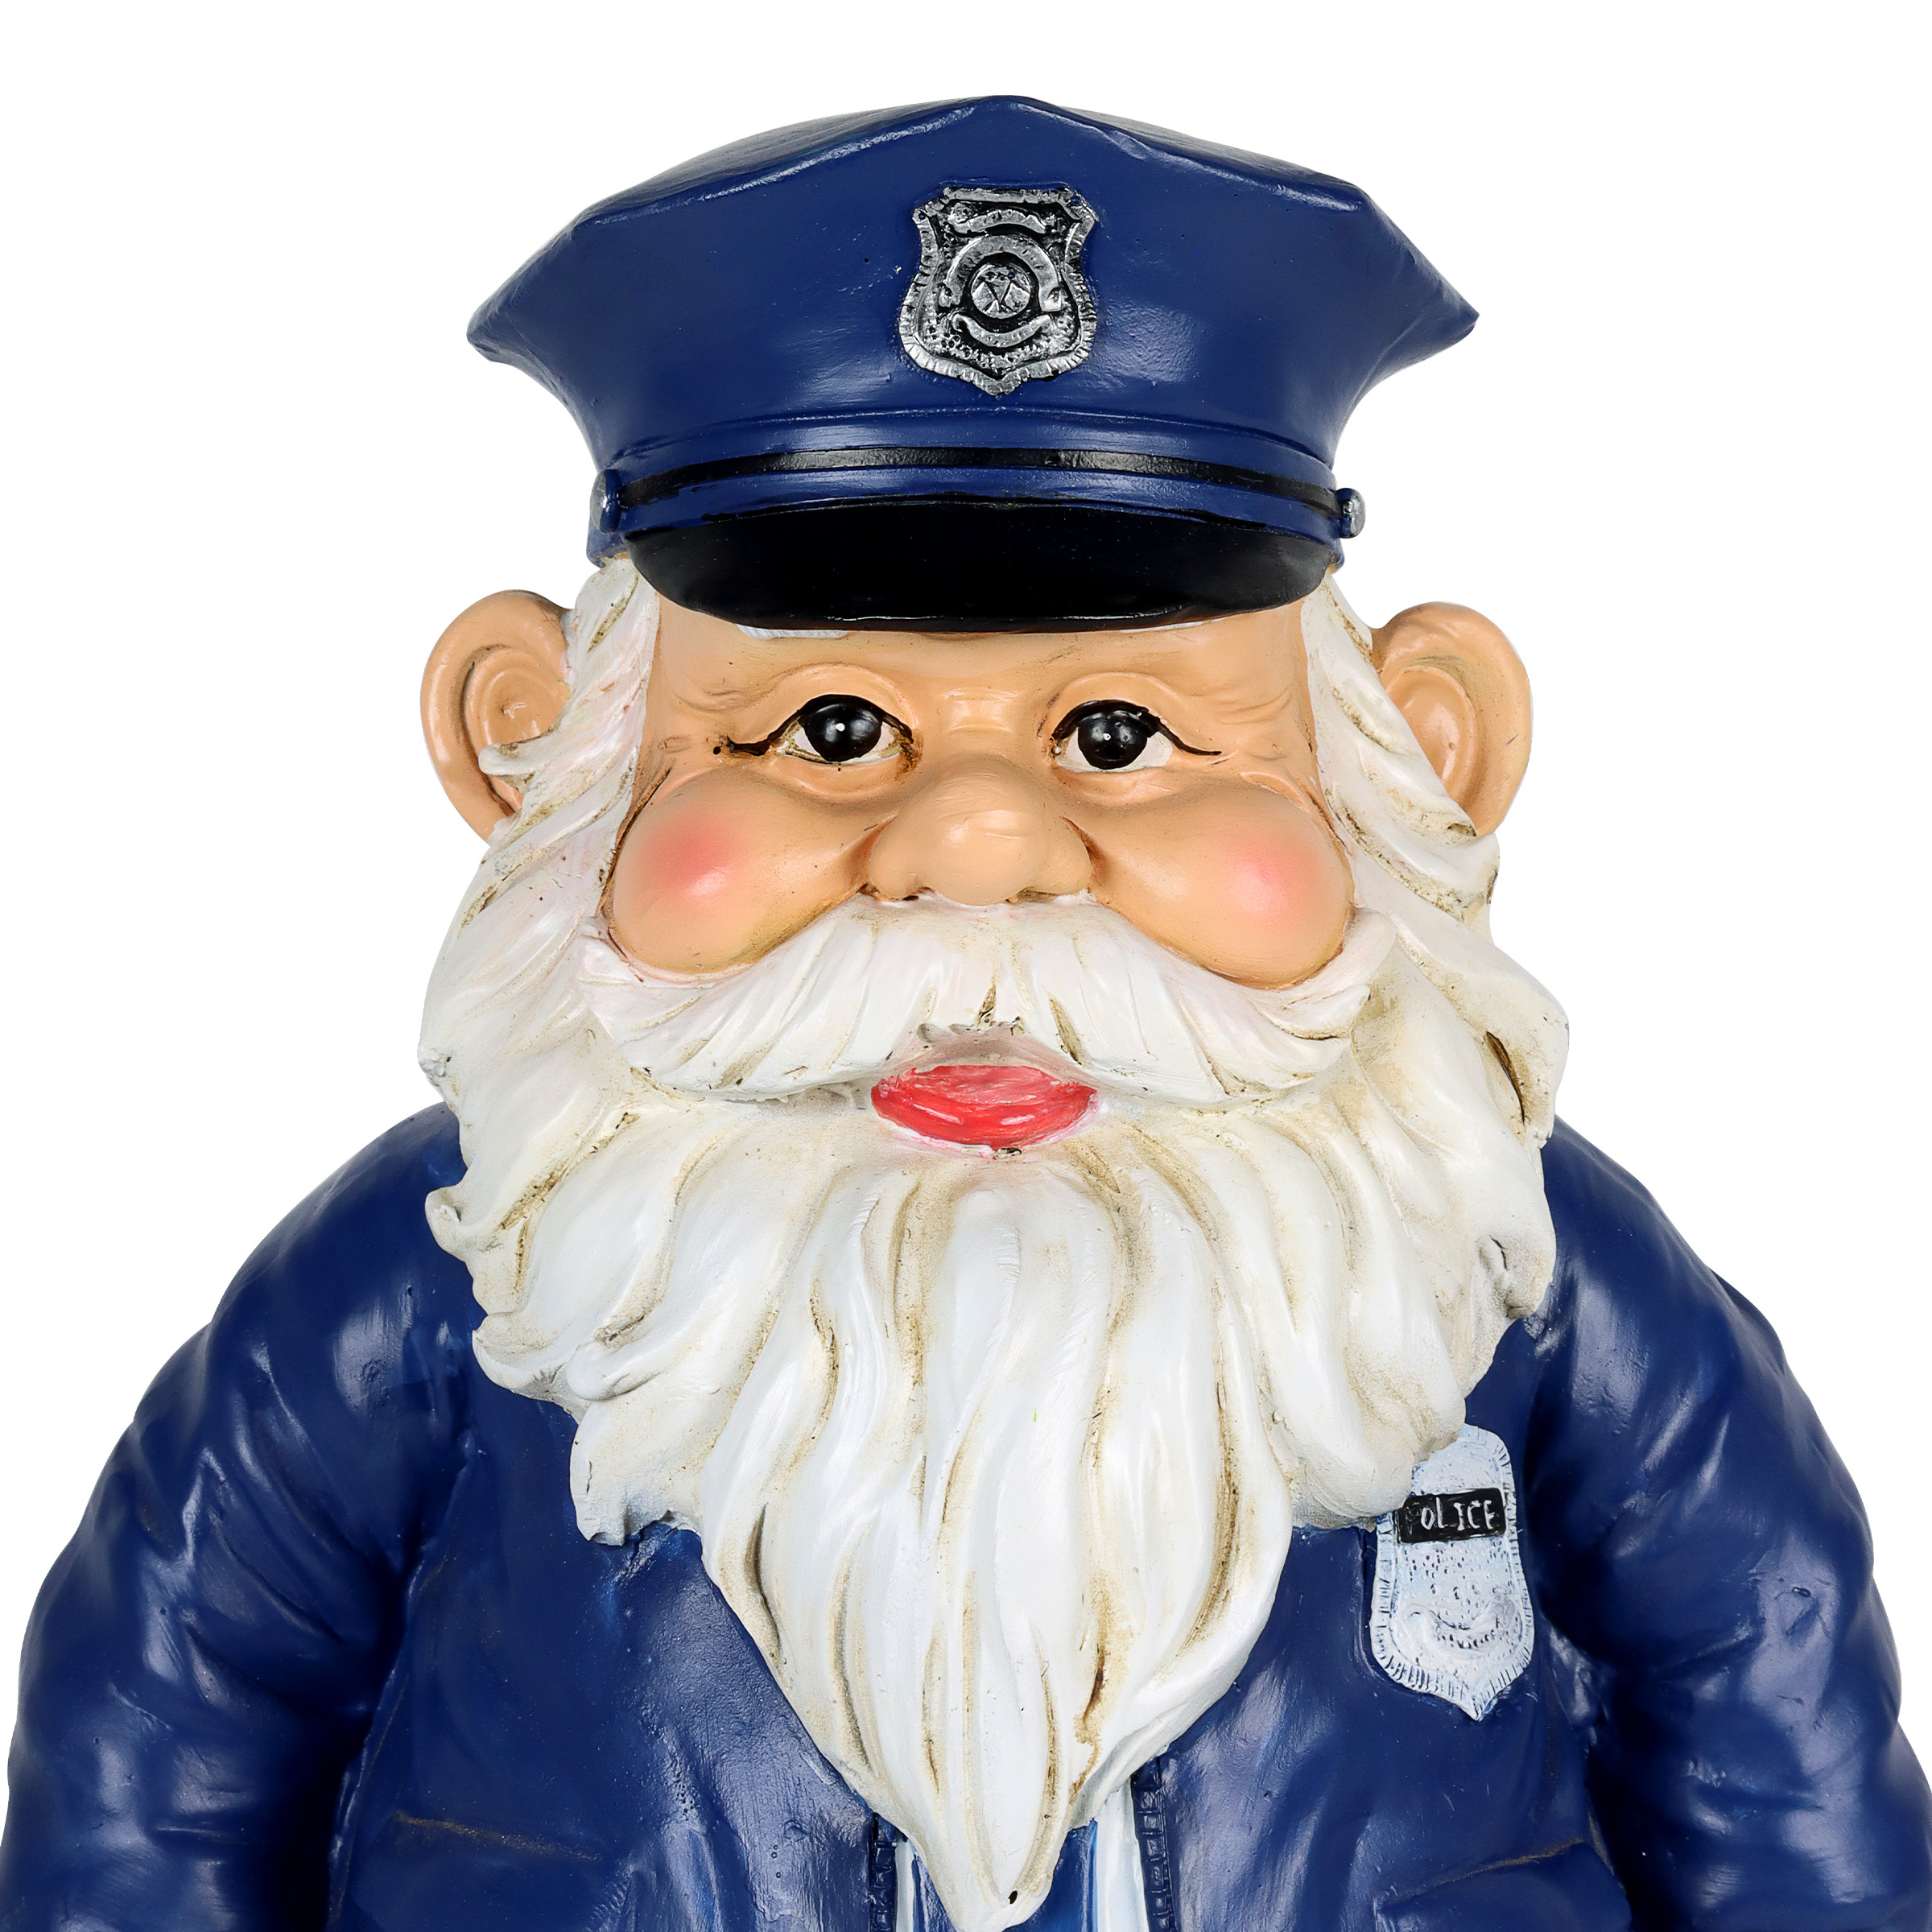 Exhart Policeman Gnome Statuary, 7.5 by 13 inches, Resin, Multicolor - image 5 of 7